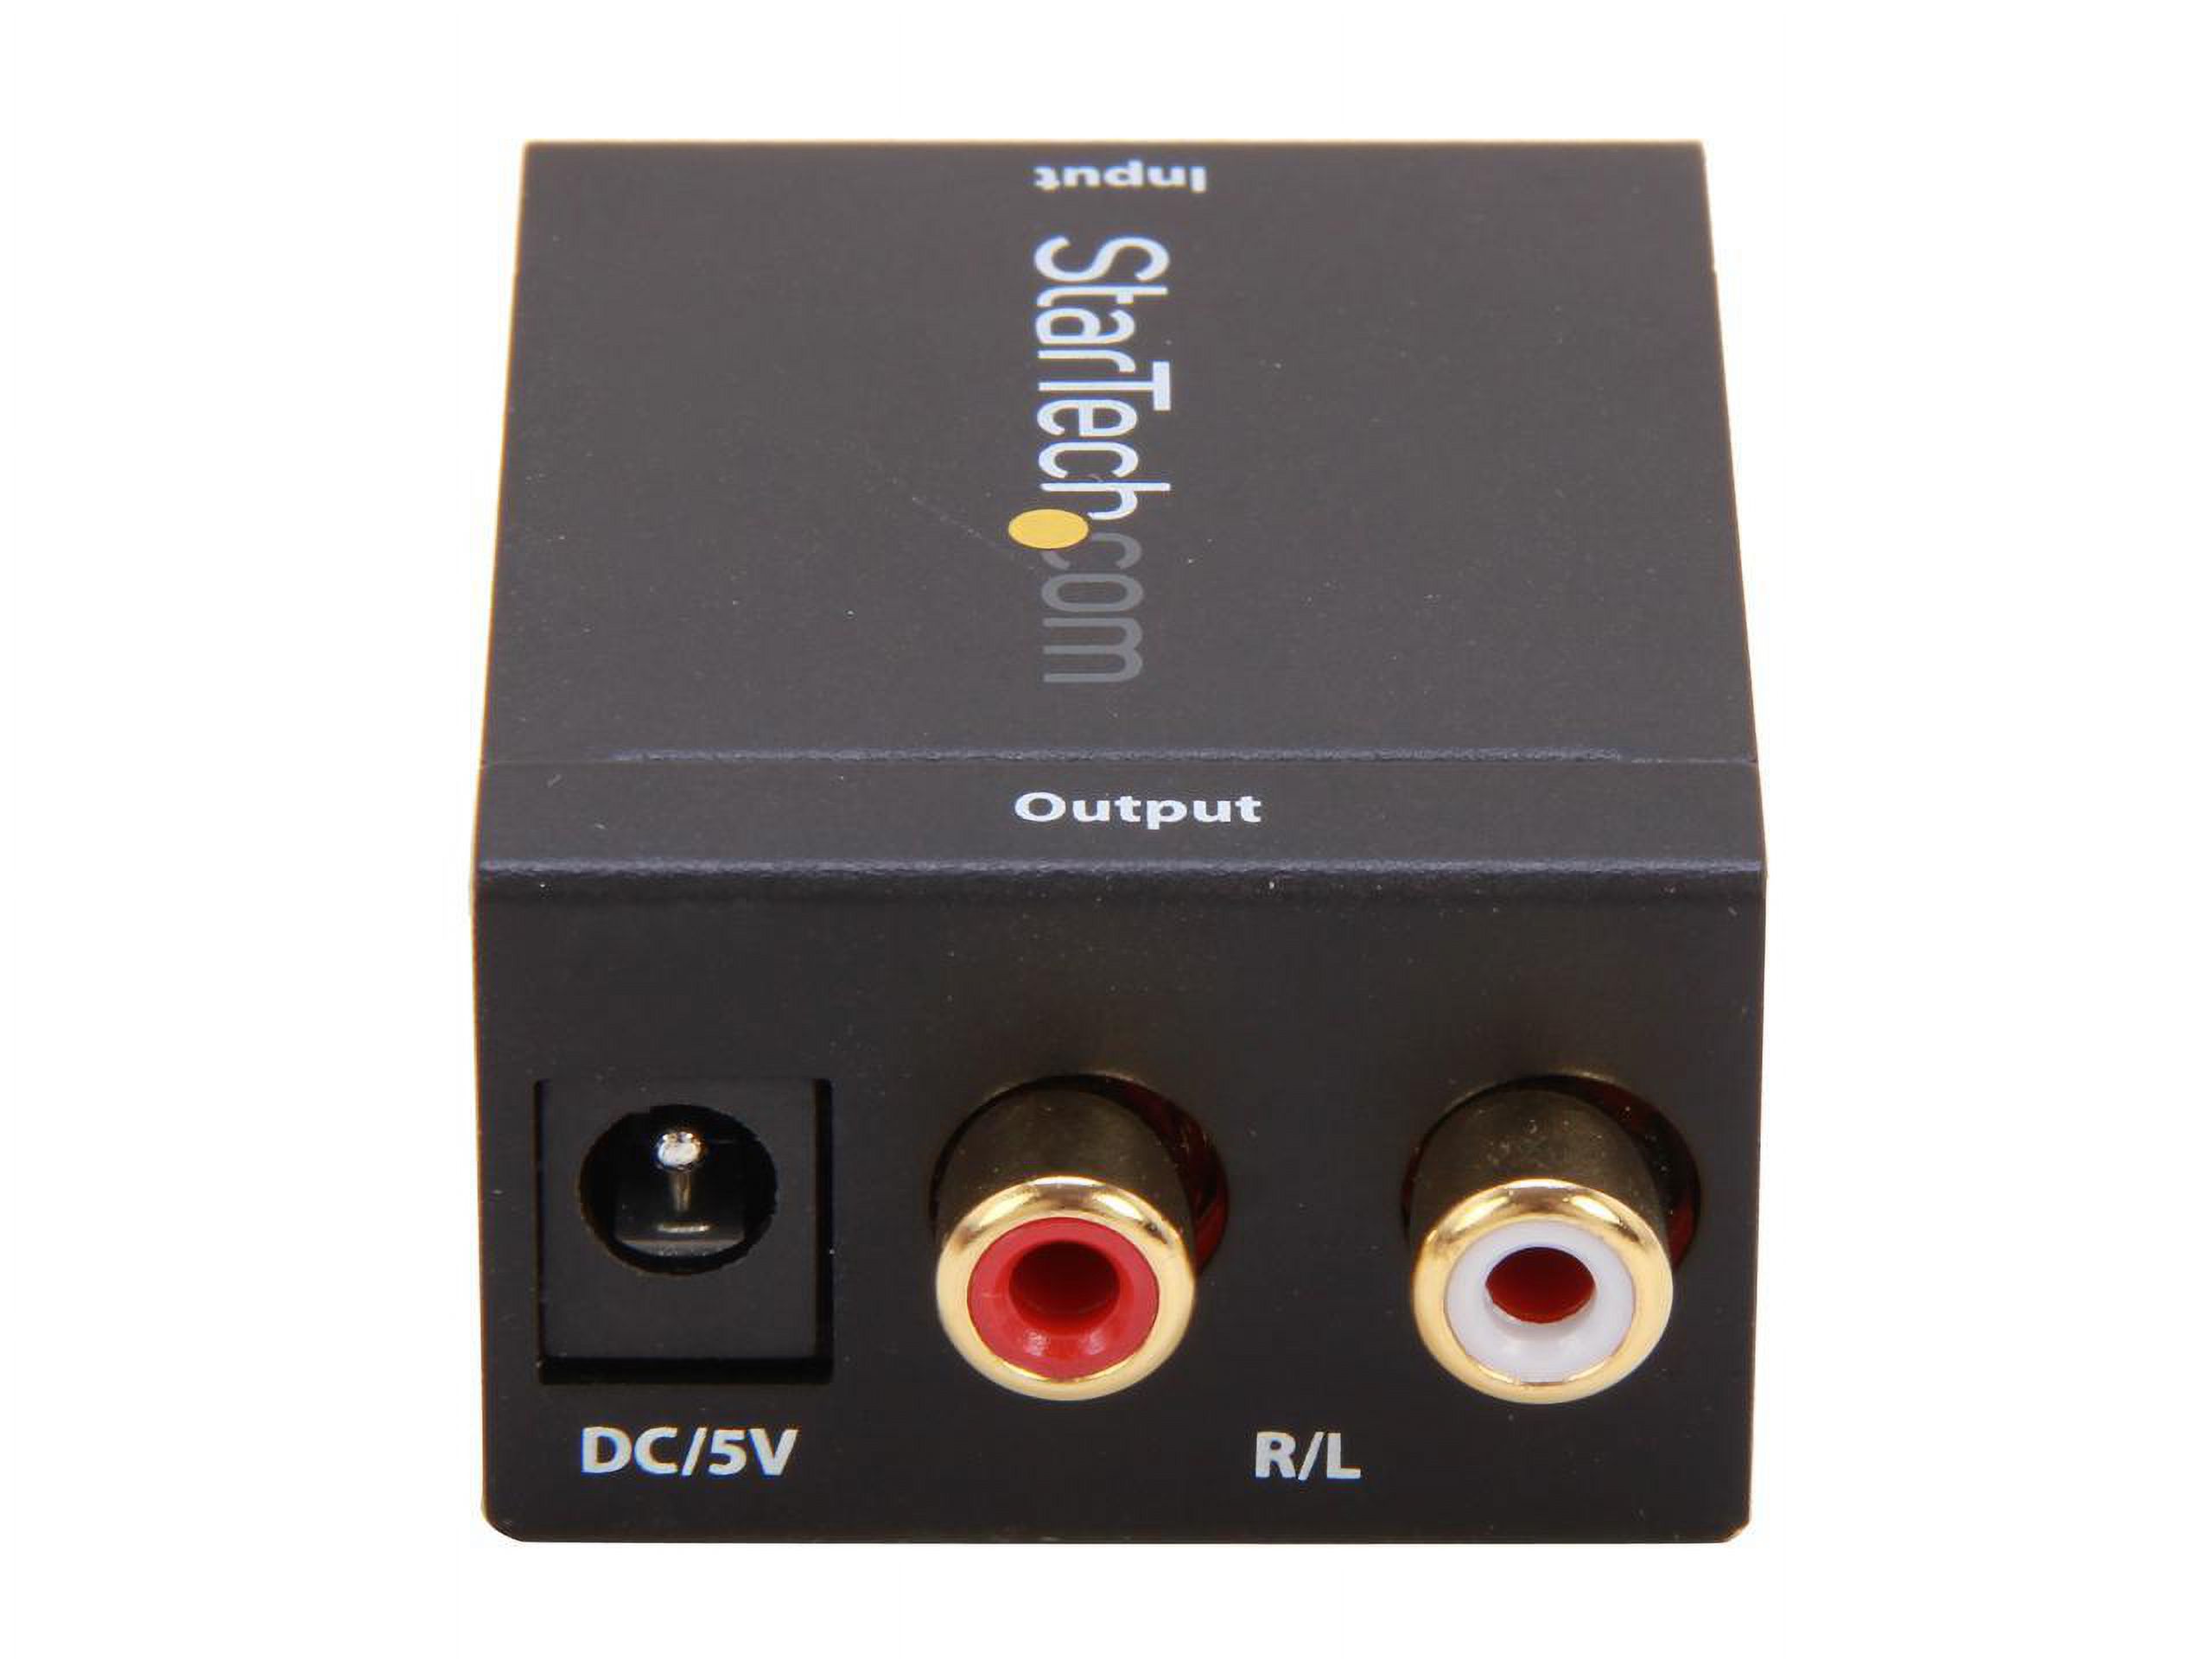 StarTech.com SPDIF2AA SPDIF Digital Coaxial or Toslink to Stereo RCA Audio Converter - image 3 of 5